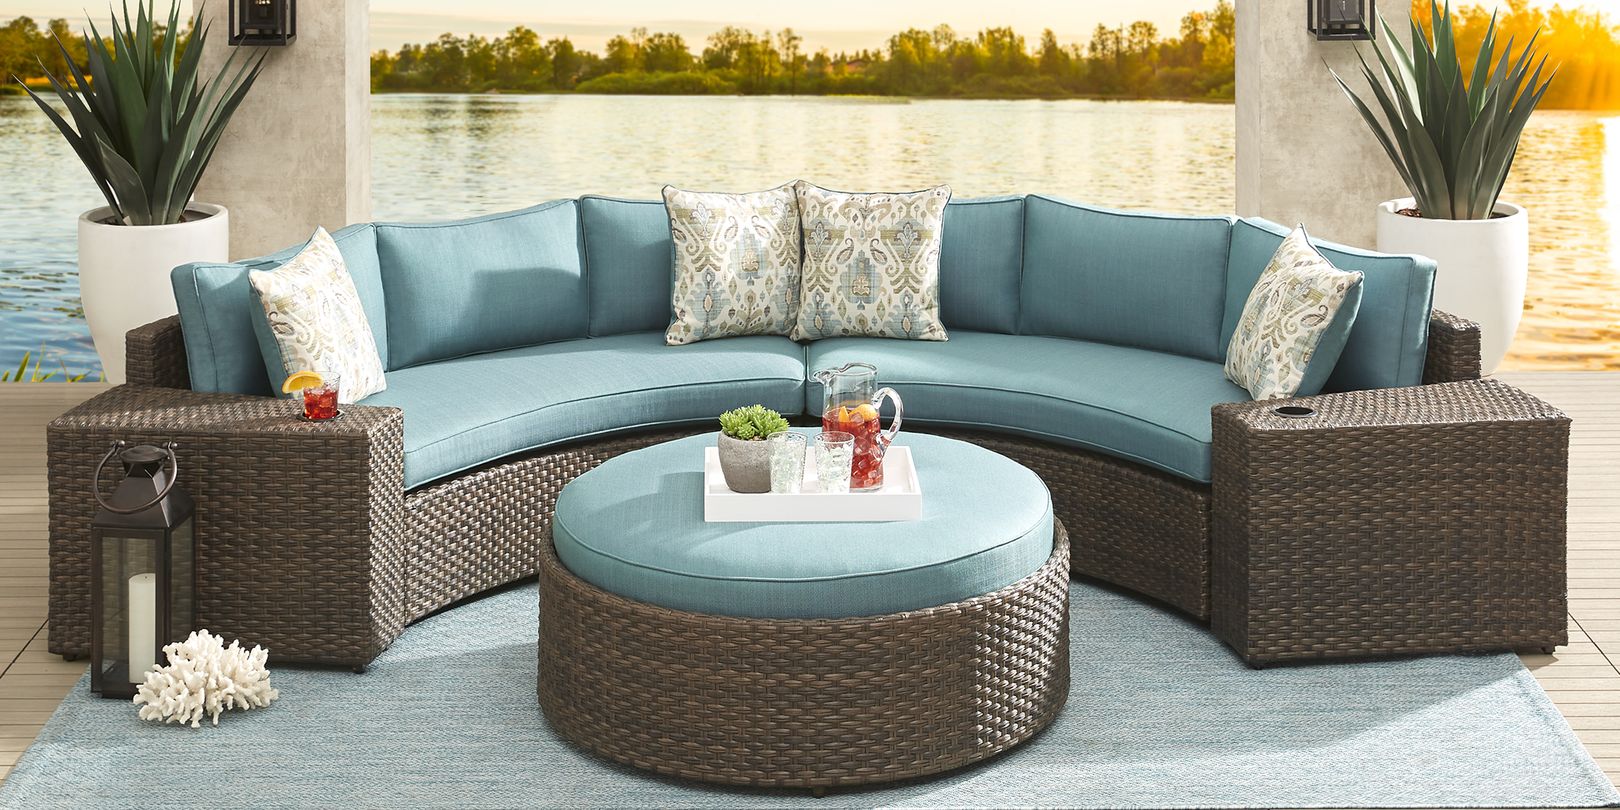 photo of a curved brown wicker sectional with aqua blue cushions